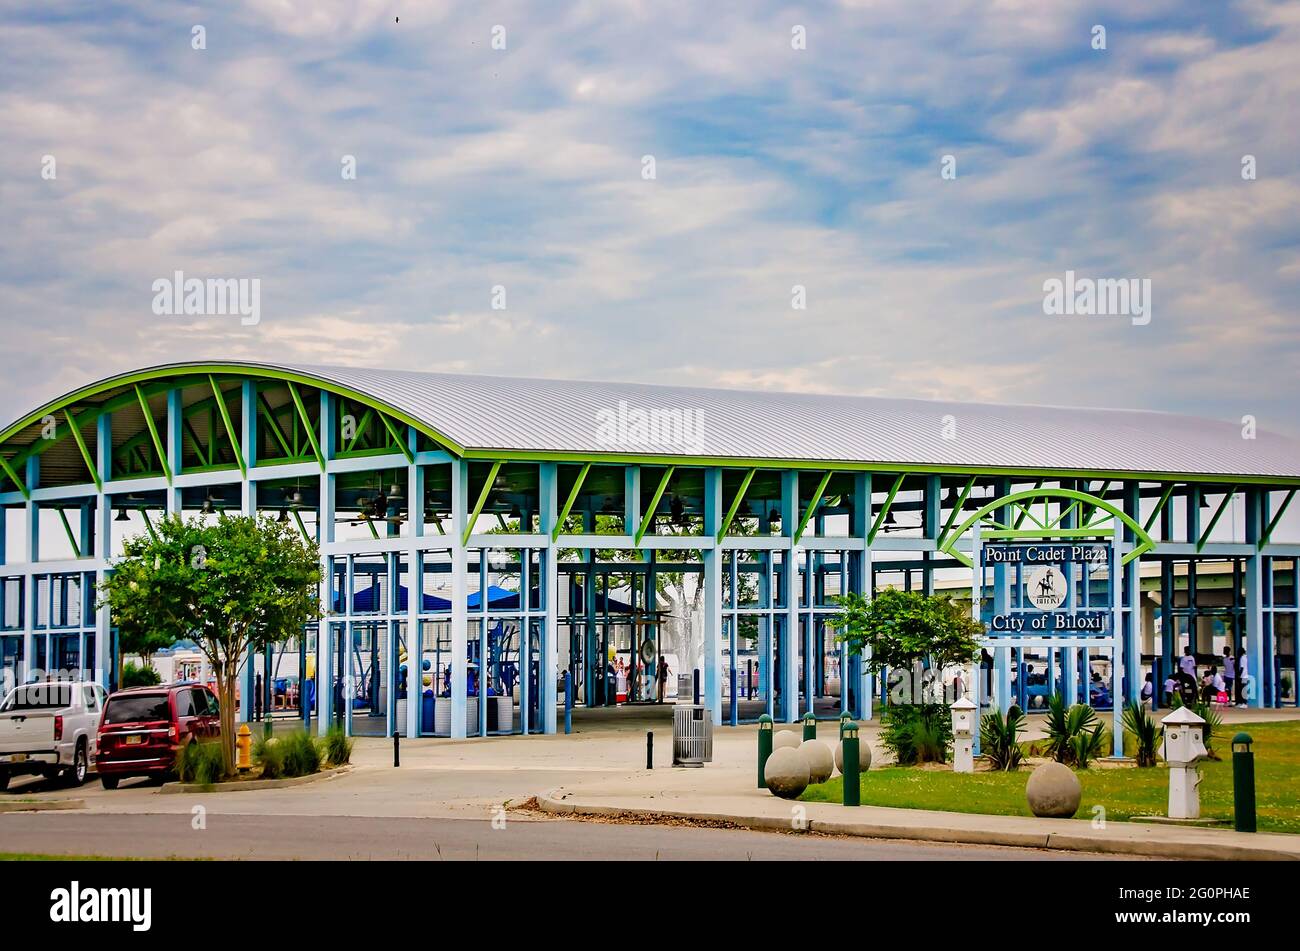 Point Cadet Plaza is pictured, May 29, 2021, in Biloxi, Mississippi. The waterfront park features a large pavilion and splash pad for children. Stock Photo